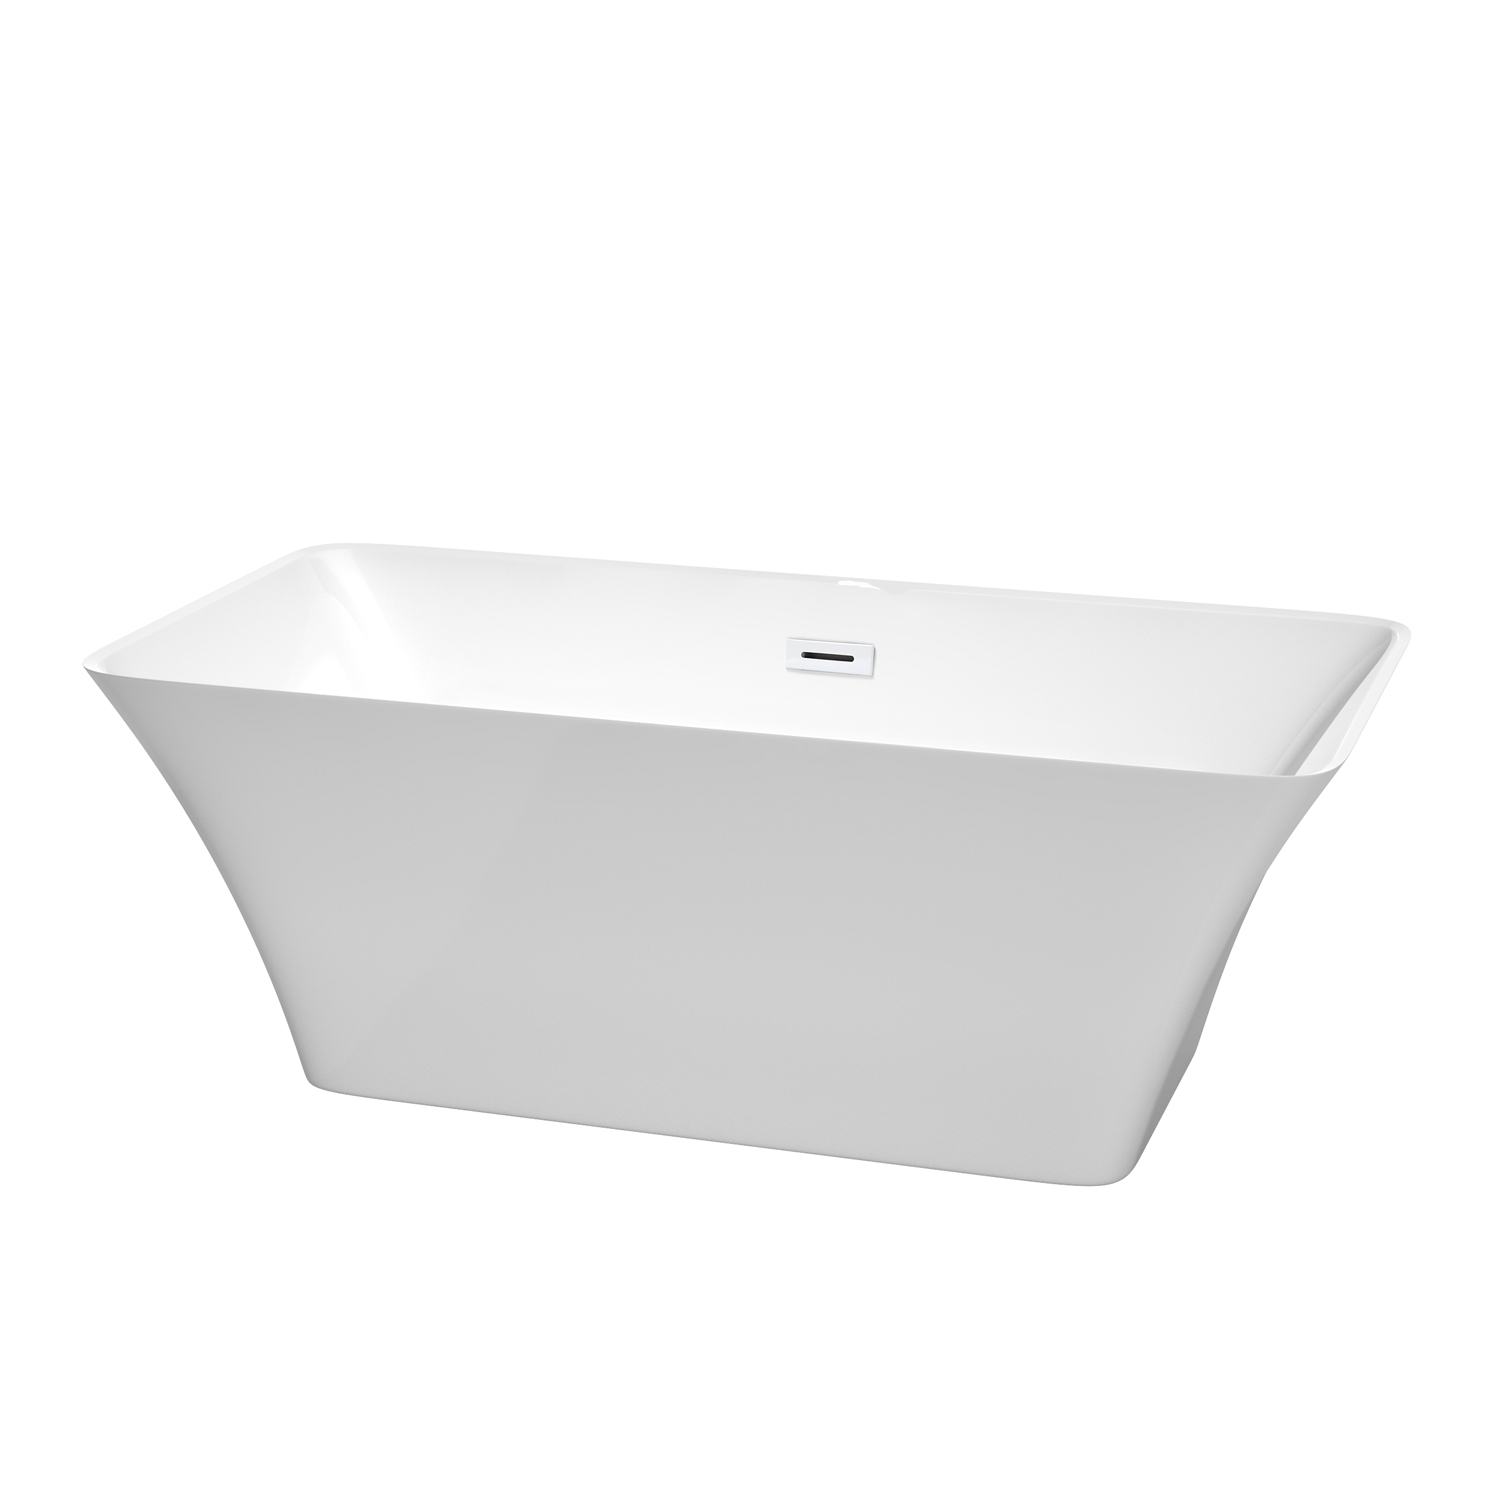 59" Freestanding Bathtub in White Finish with Shiny White Drain and Overflow Trim